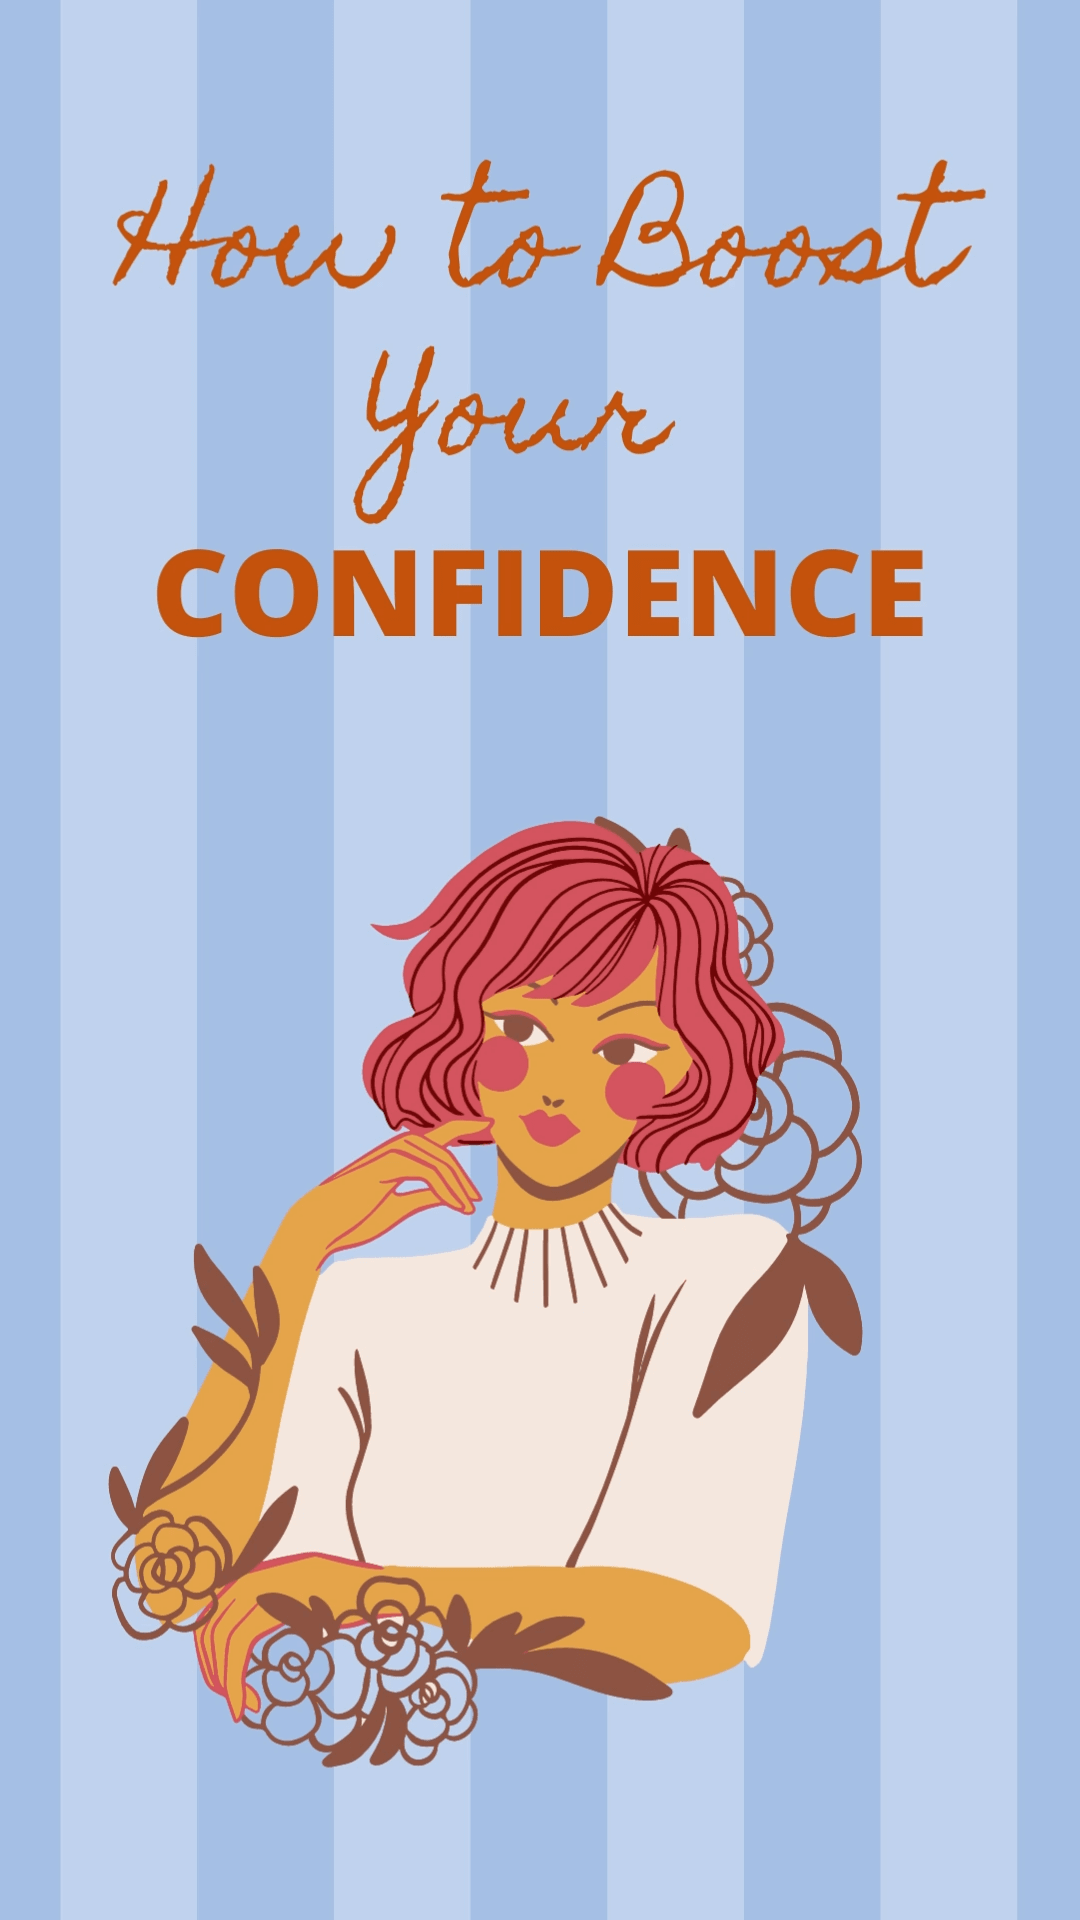 How to boost your Confidence - Girlwithdreams